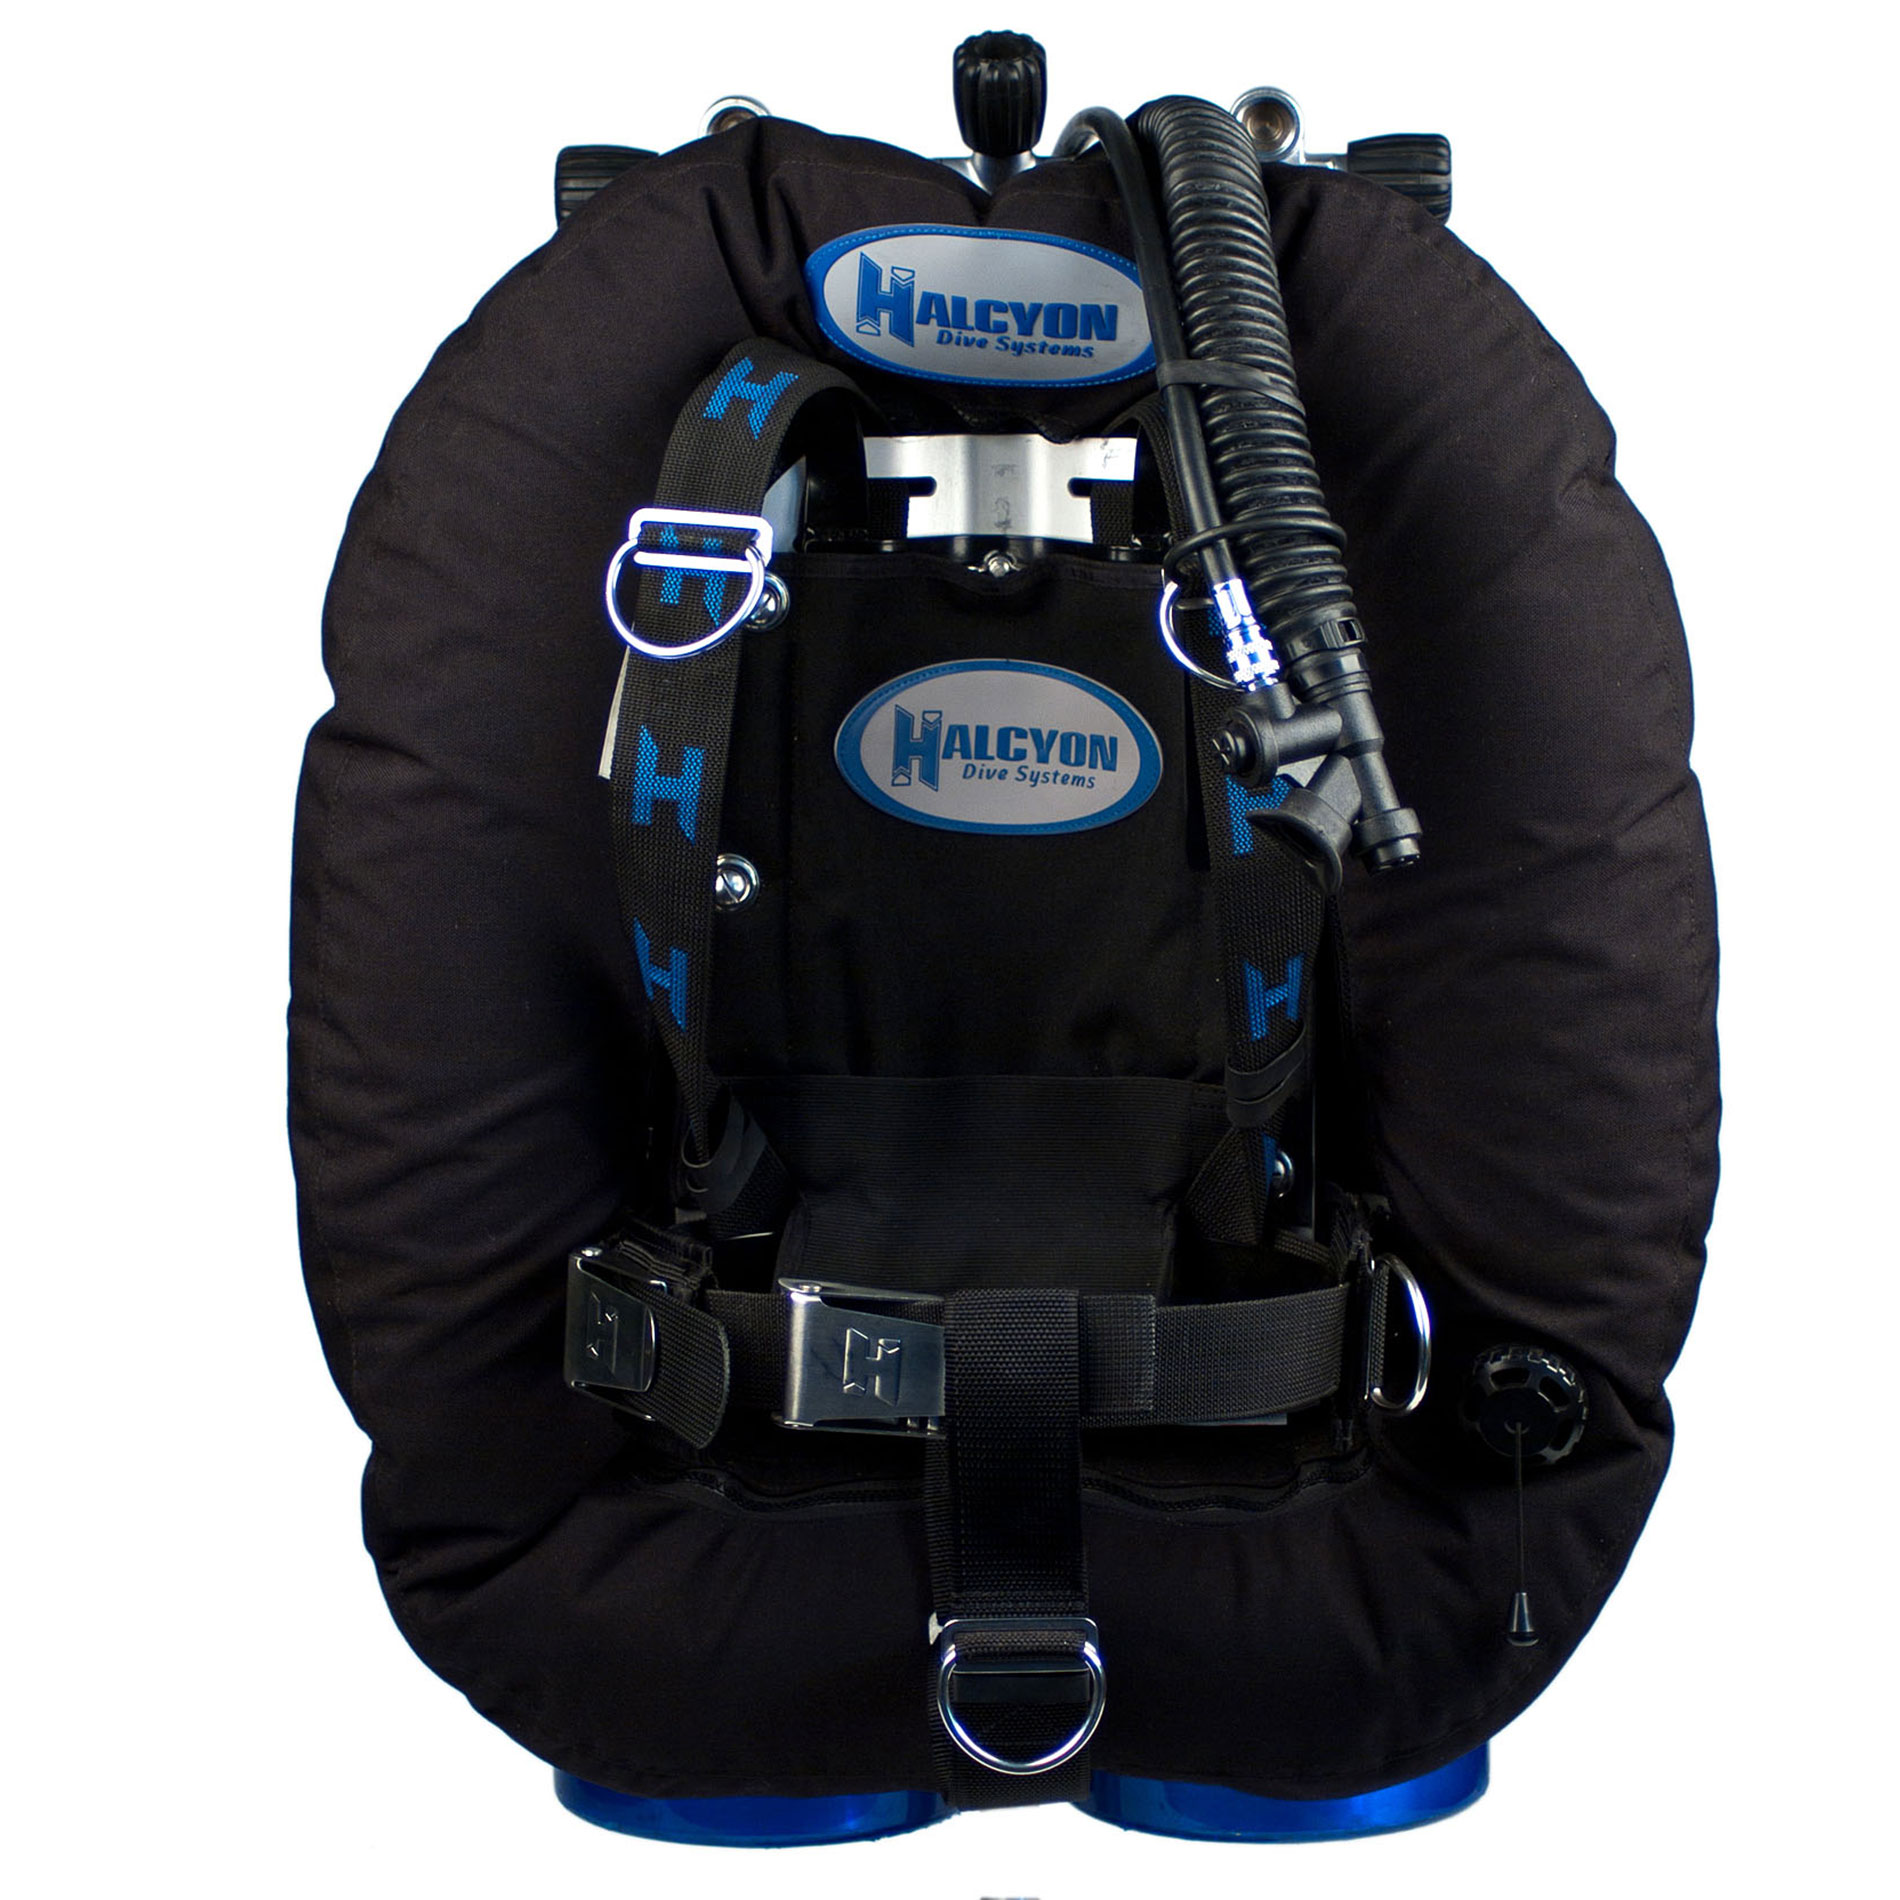 Halcyon Evolve BCD System without Cinch